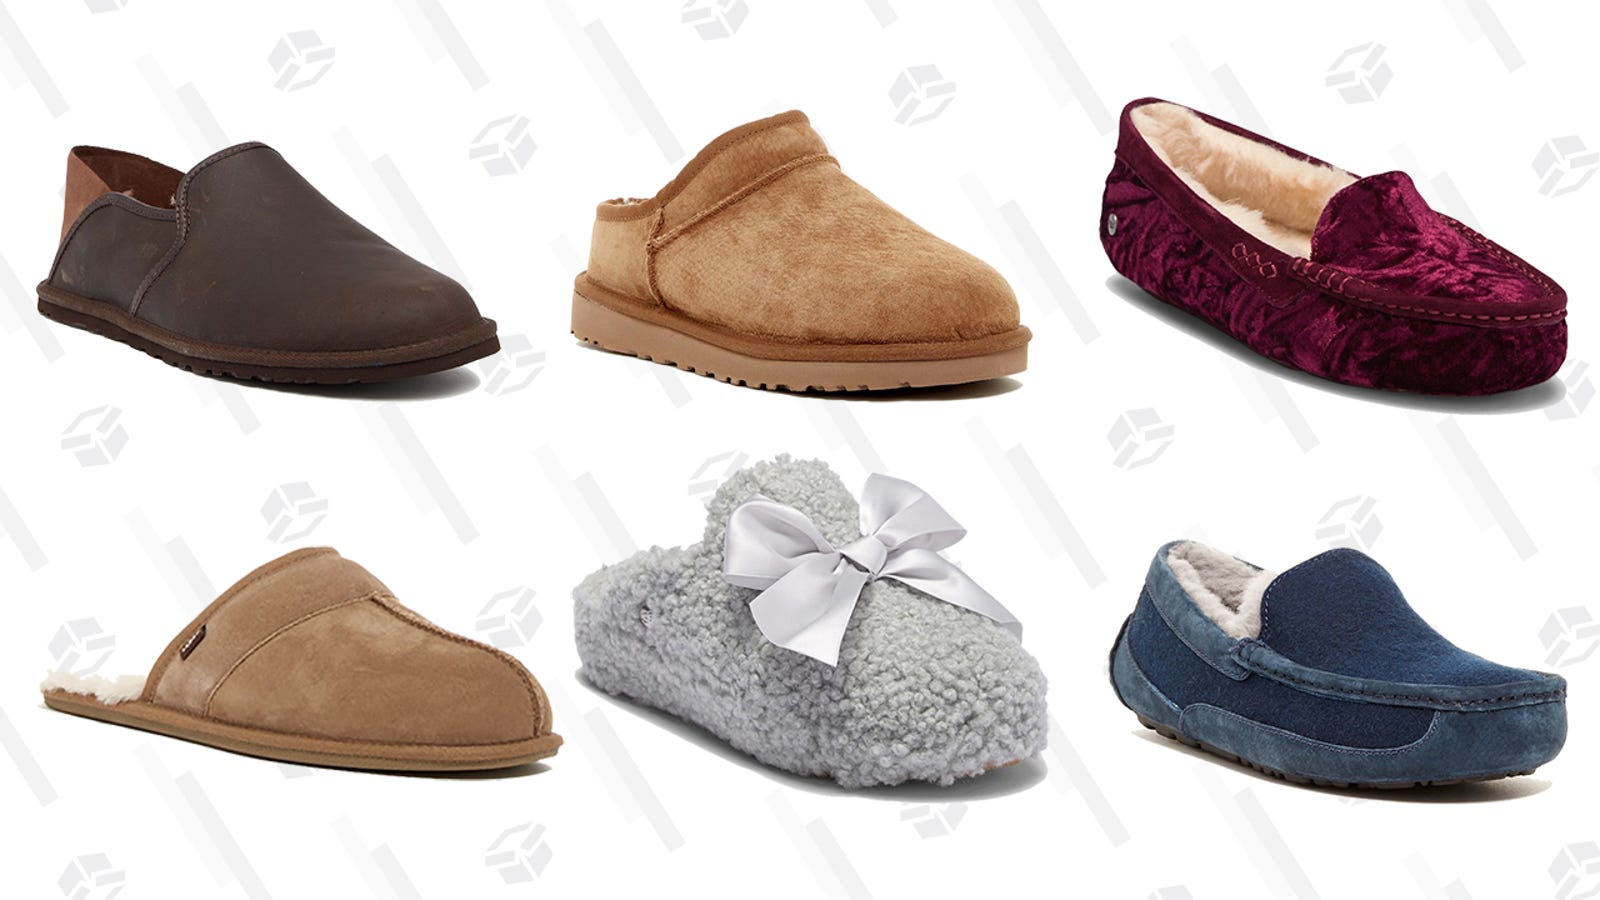 Ugg Slippers Are On Sale at Nordstrom Rack